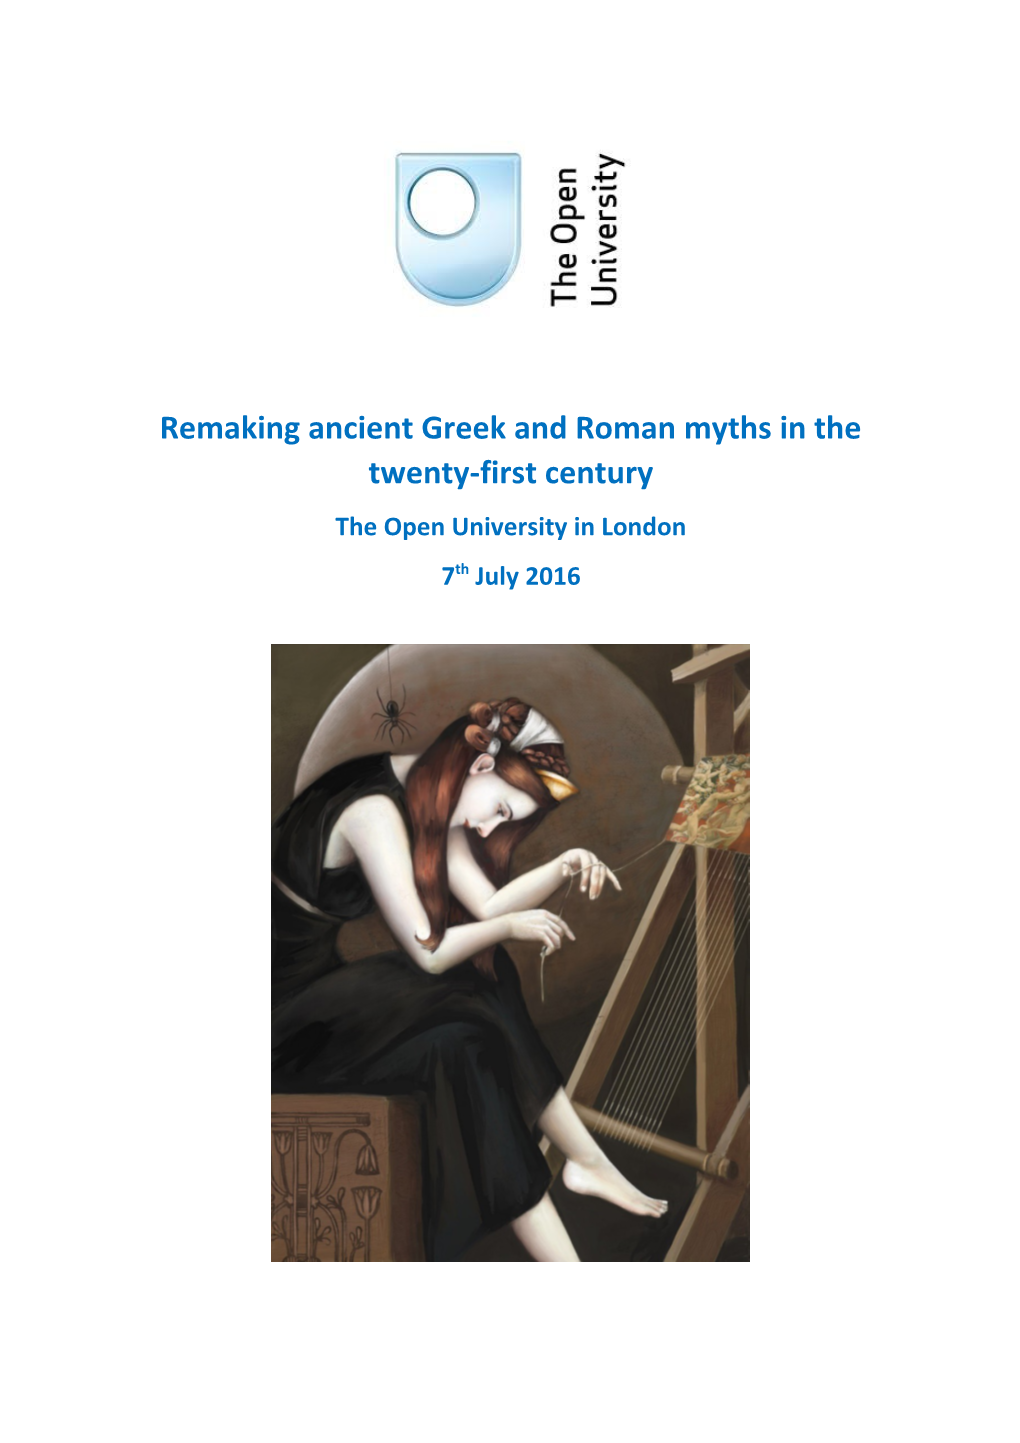 Remaking Ancient Greek and Roman Myths in the Twenty-First Century